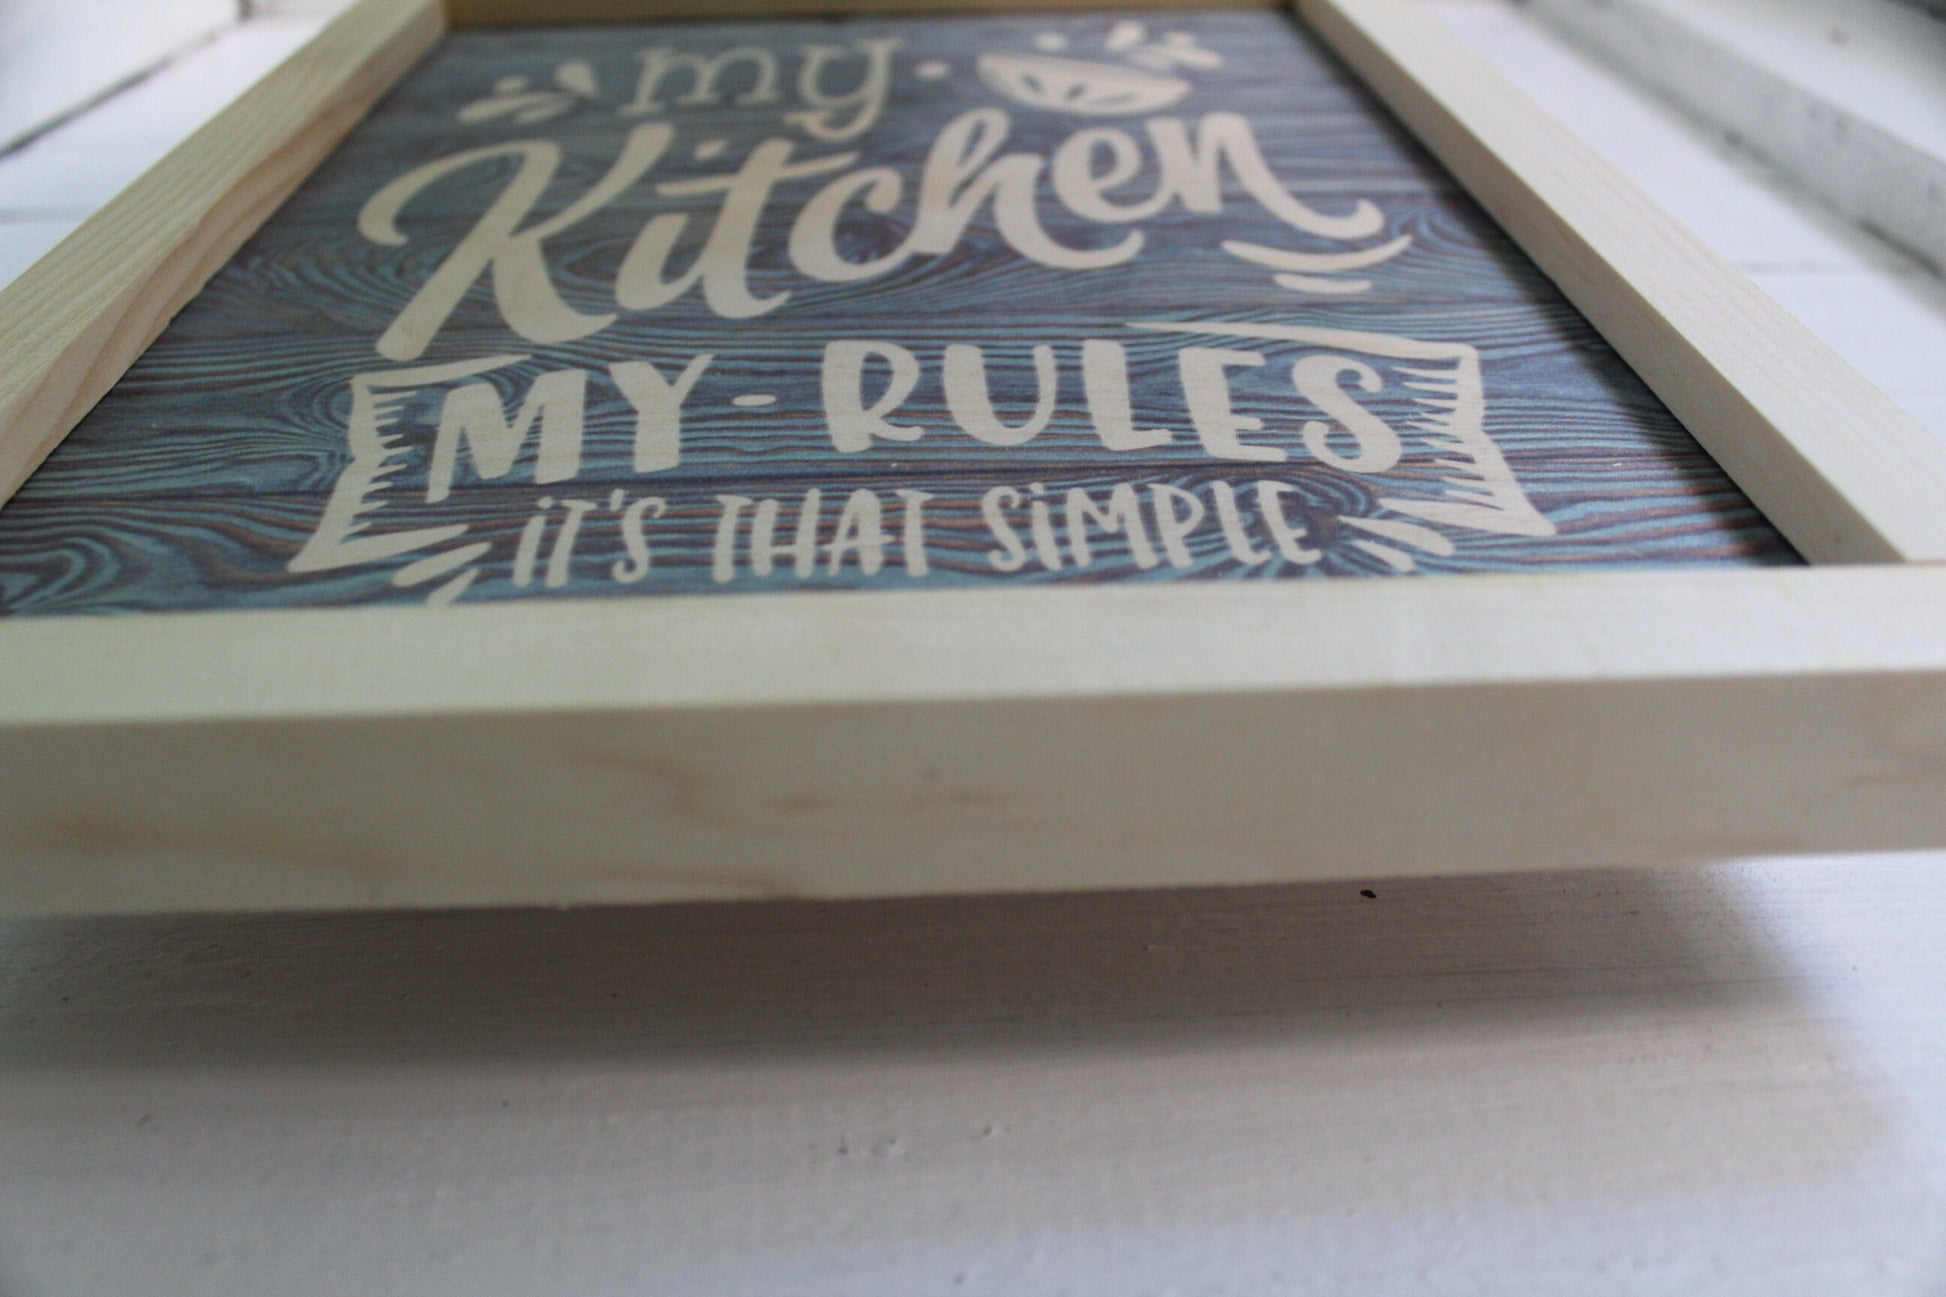 My Kitchen My Rules Wood Sign Blue Rustic Framed Wall Hanging Decor It's That Simple Decoration Primitive Country Bowl Text Print Cook